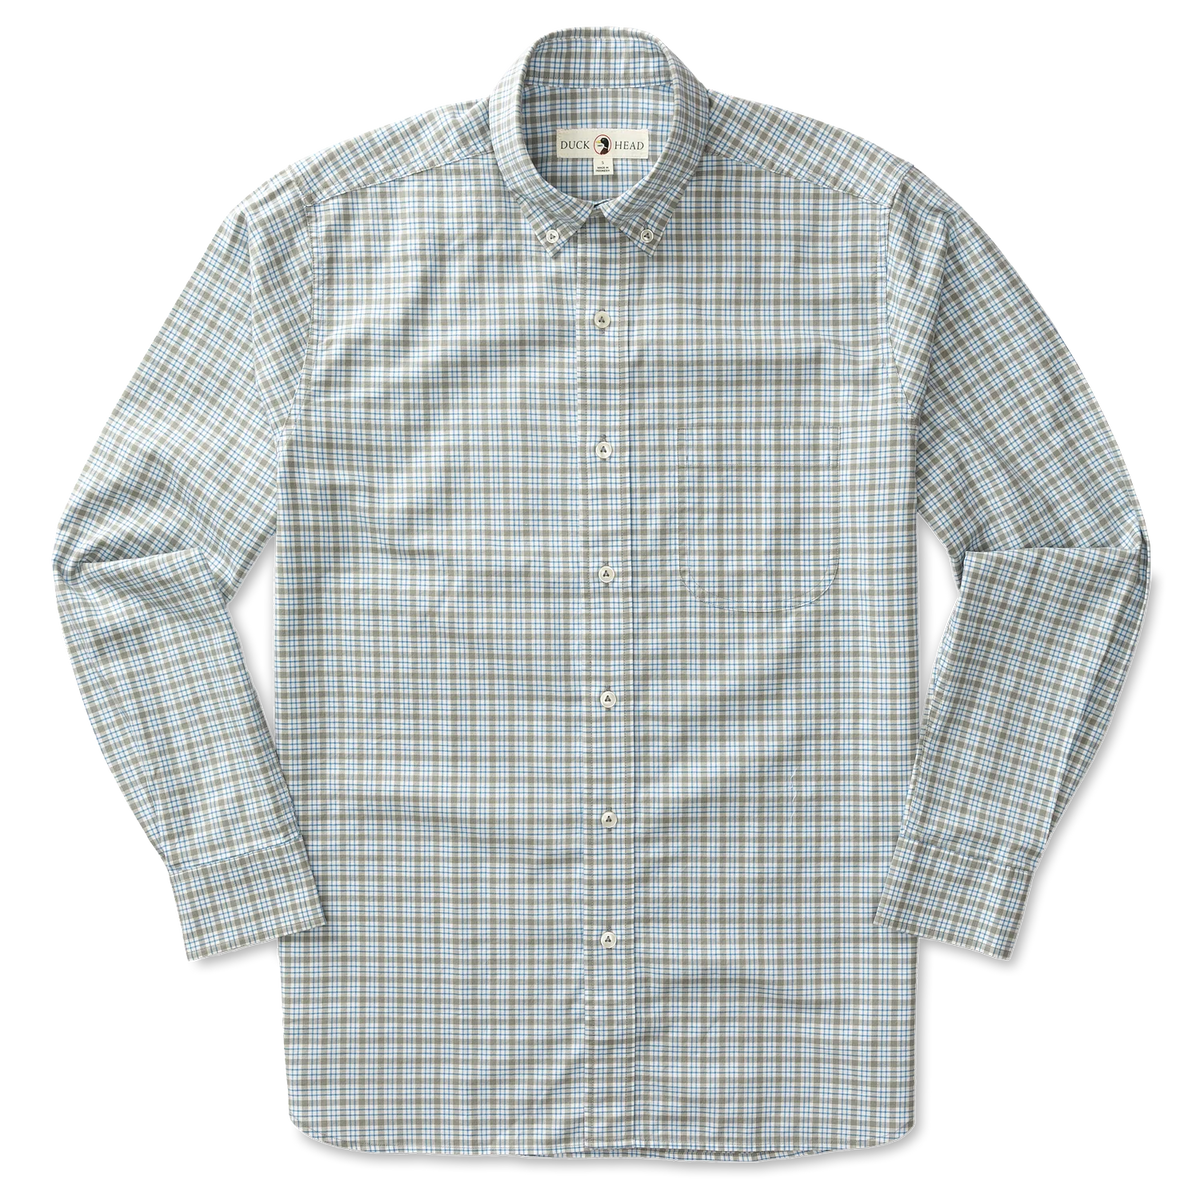 Caswell Plaid Cotton Oxford Sport Shirt